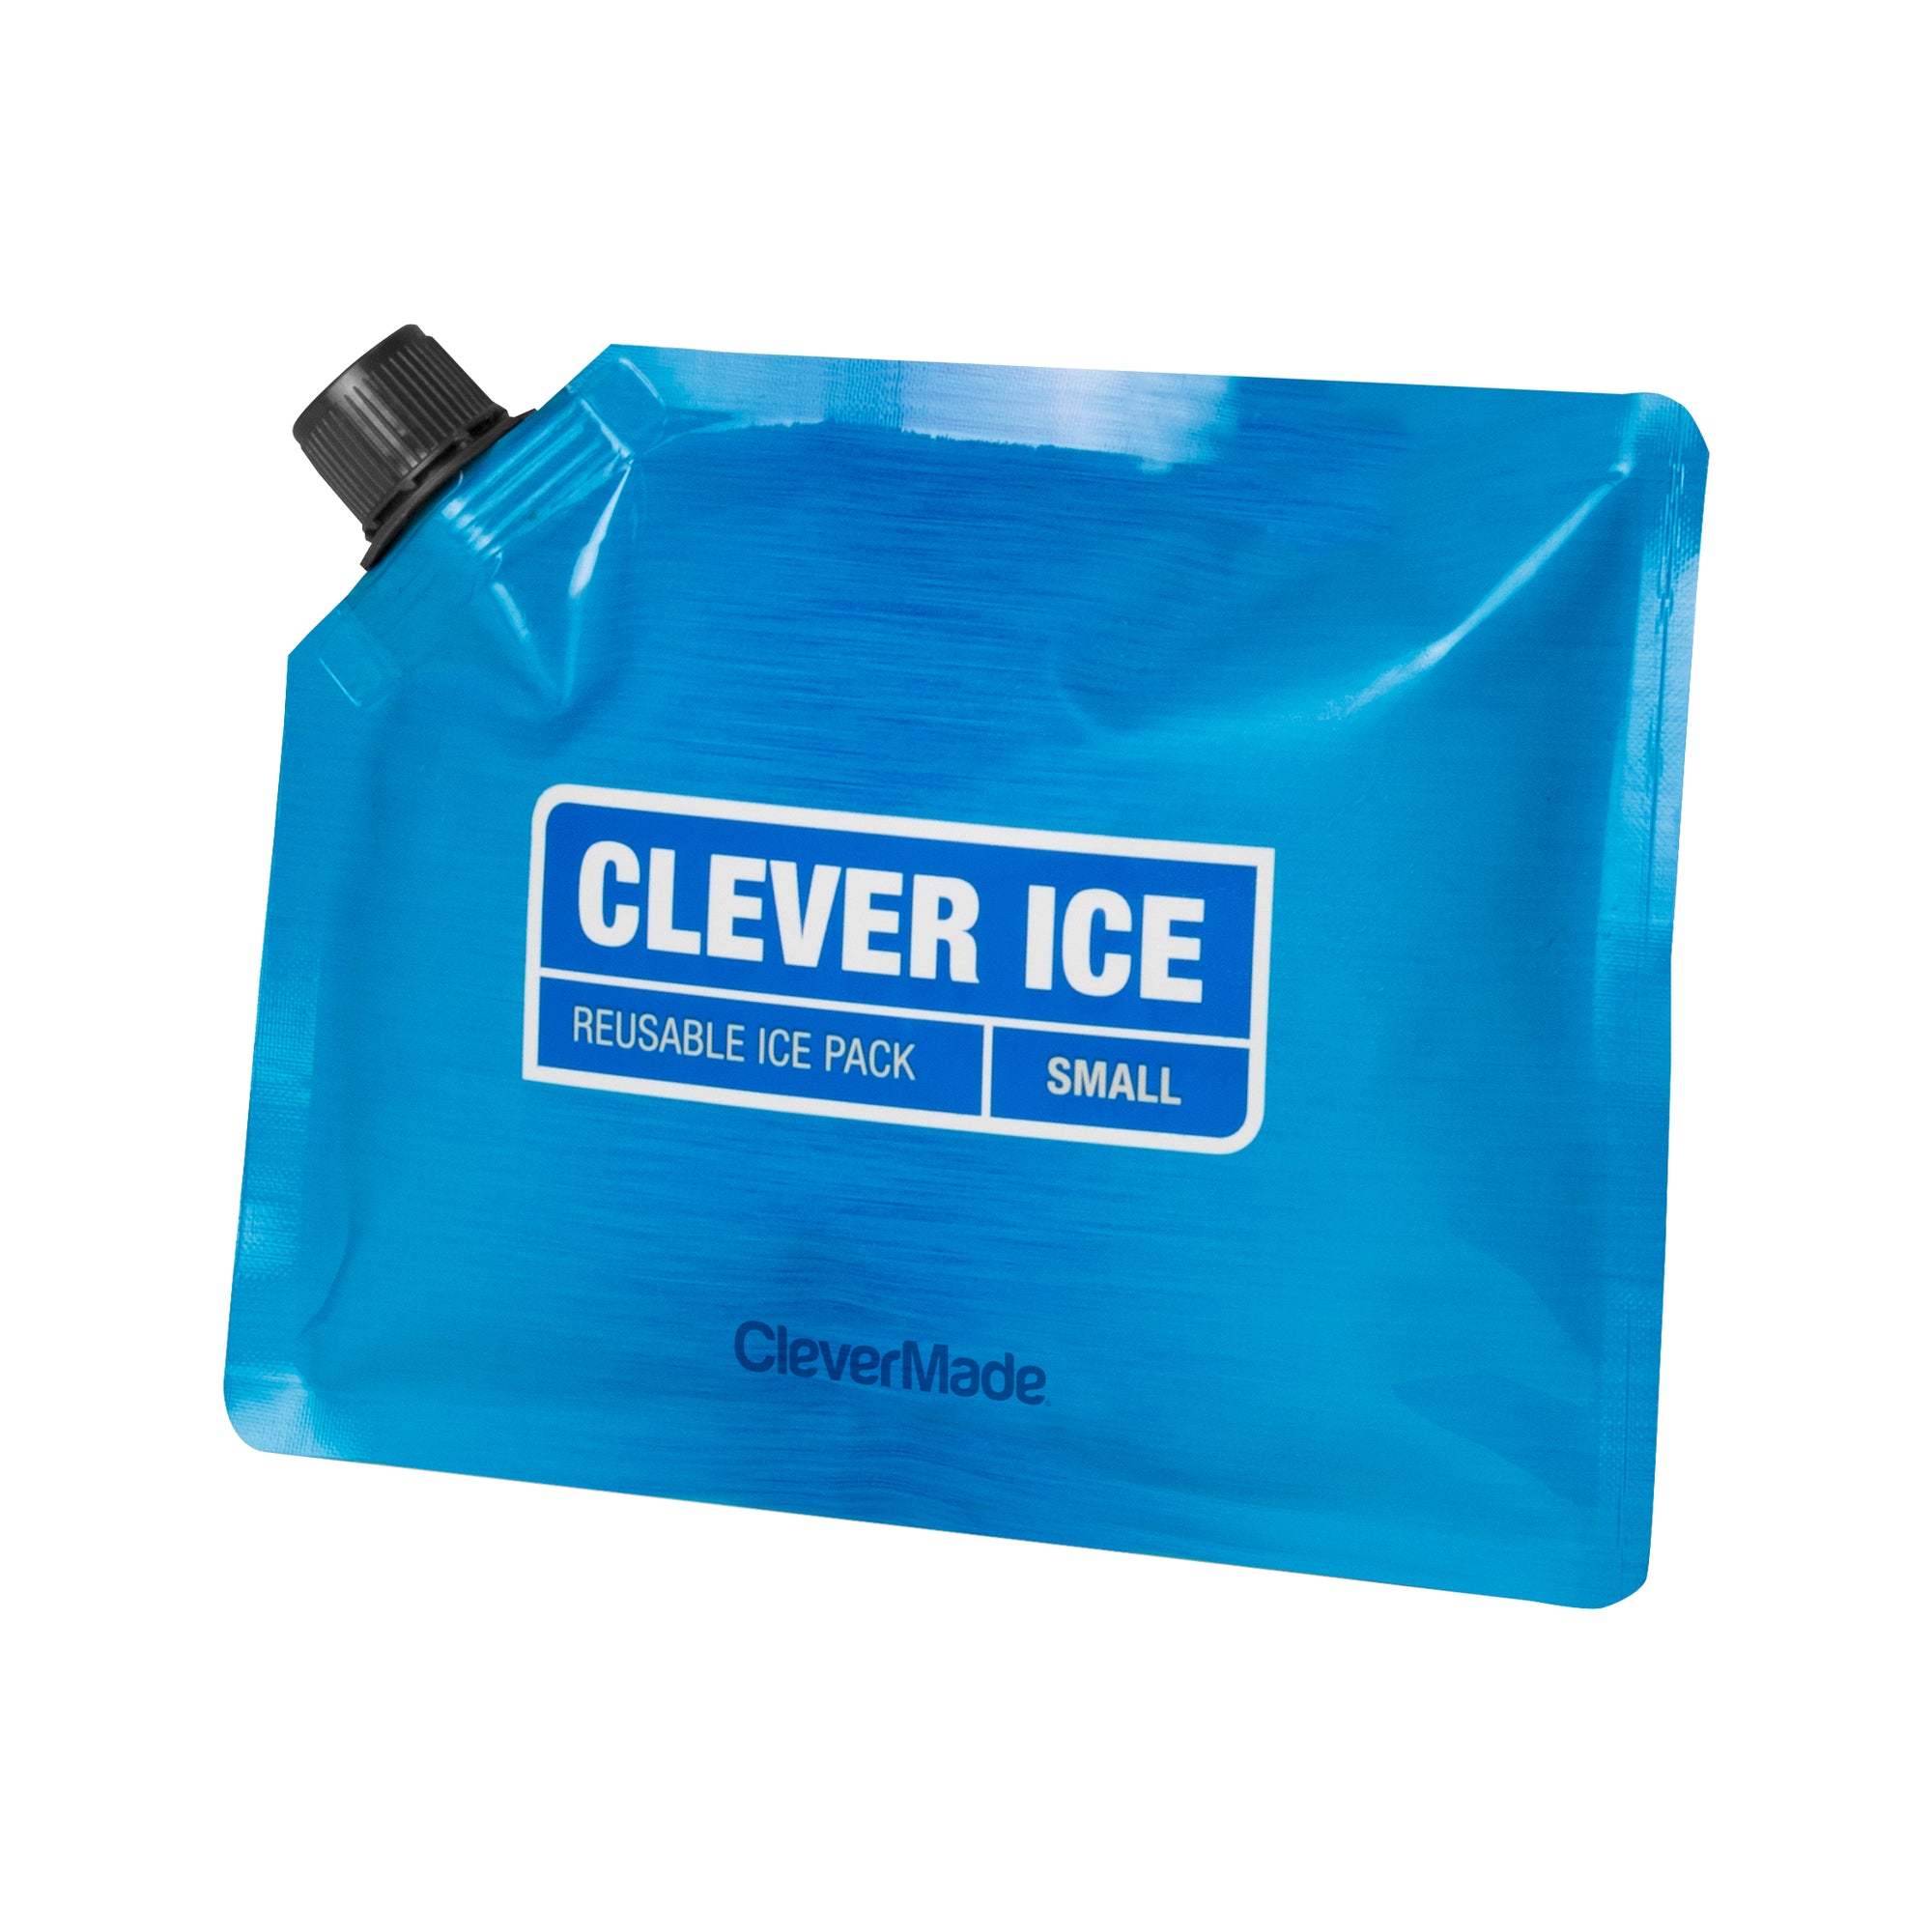 Clever Ice